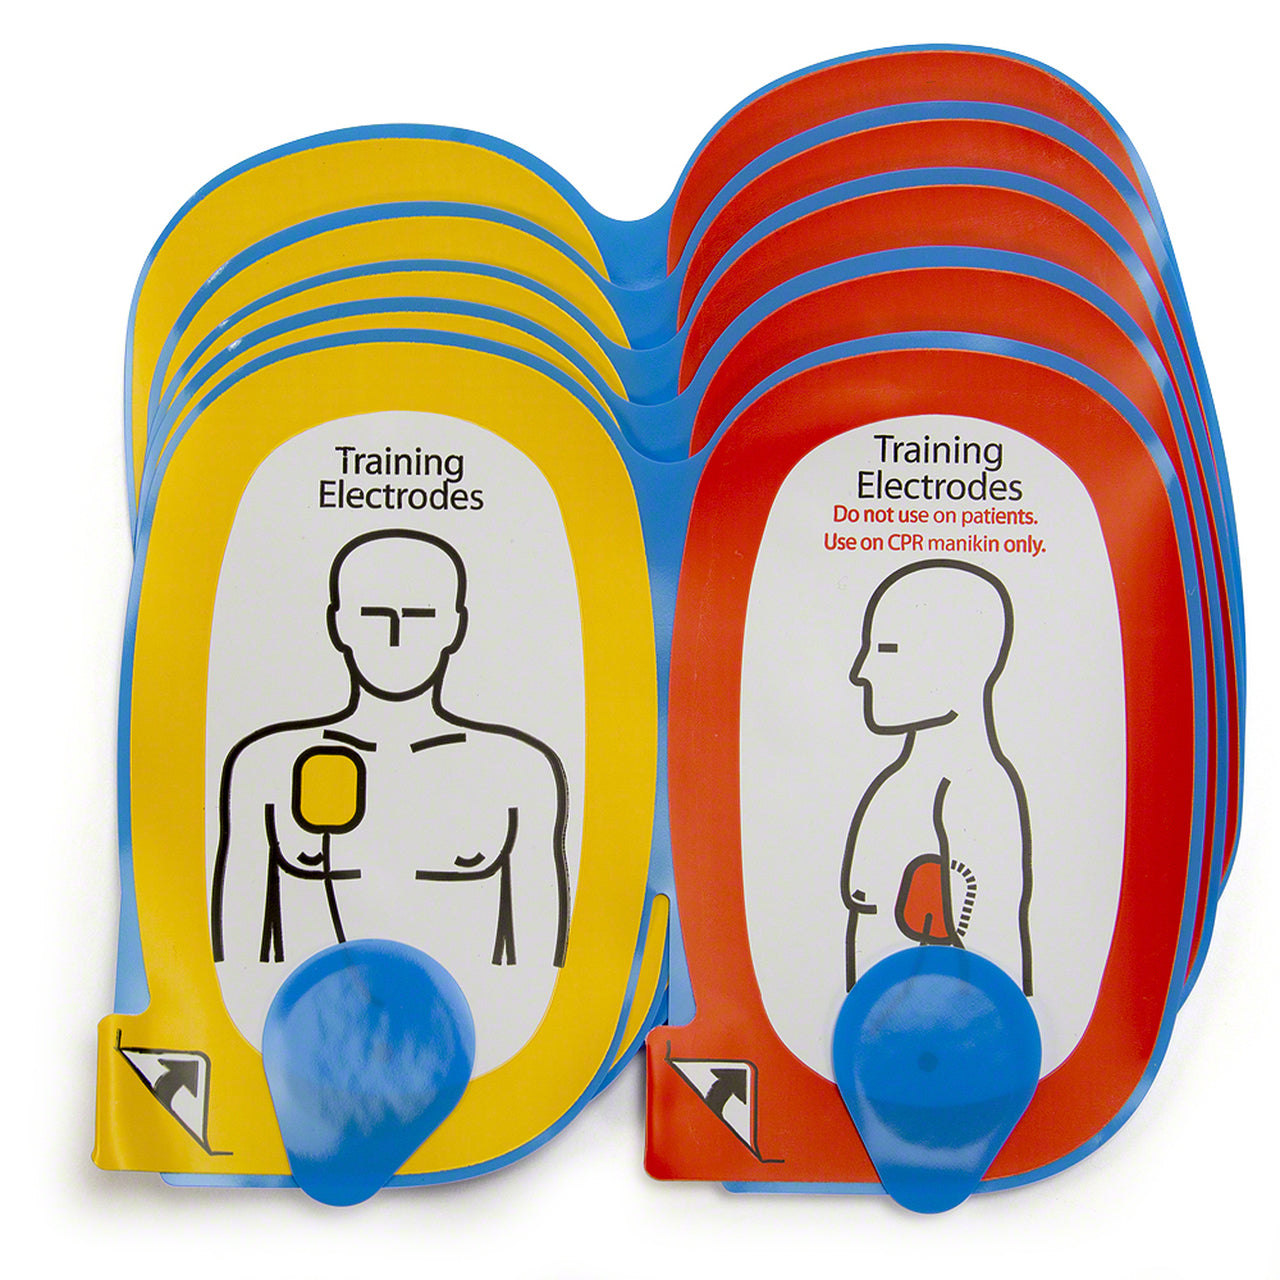 A set of 5 colorful training pads for the LIFEPAK CR Plus AED